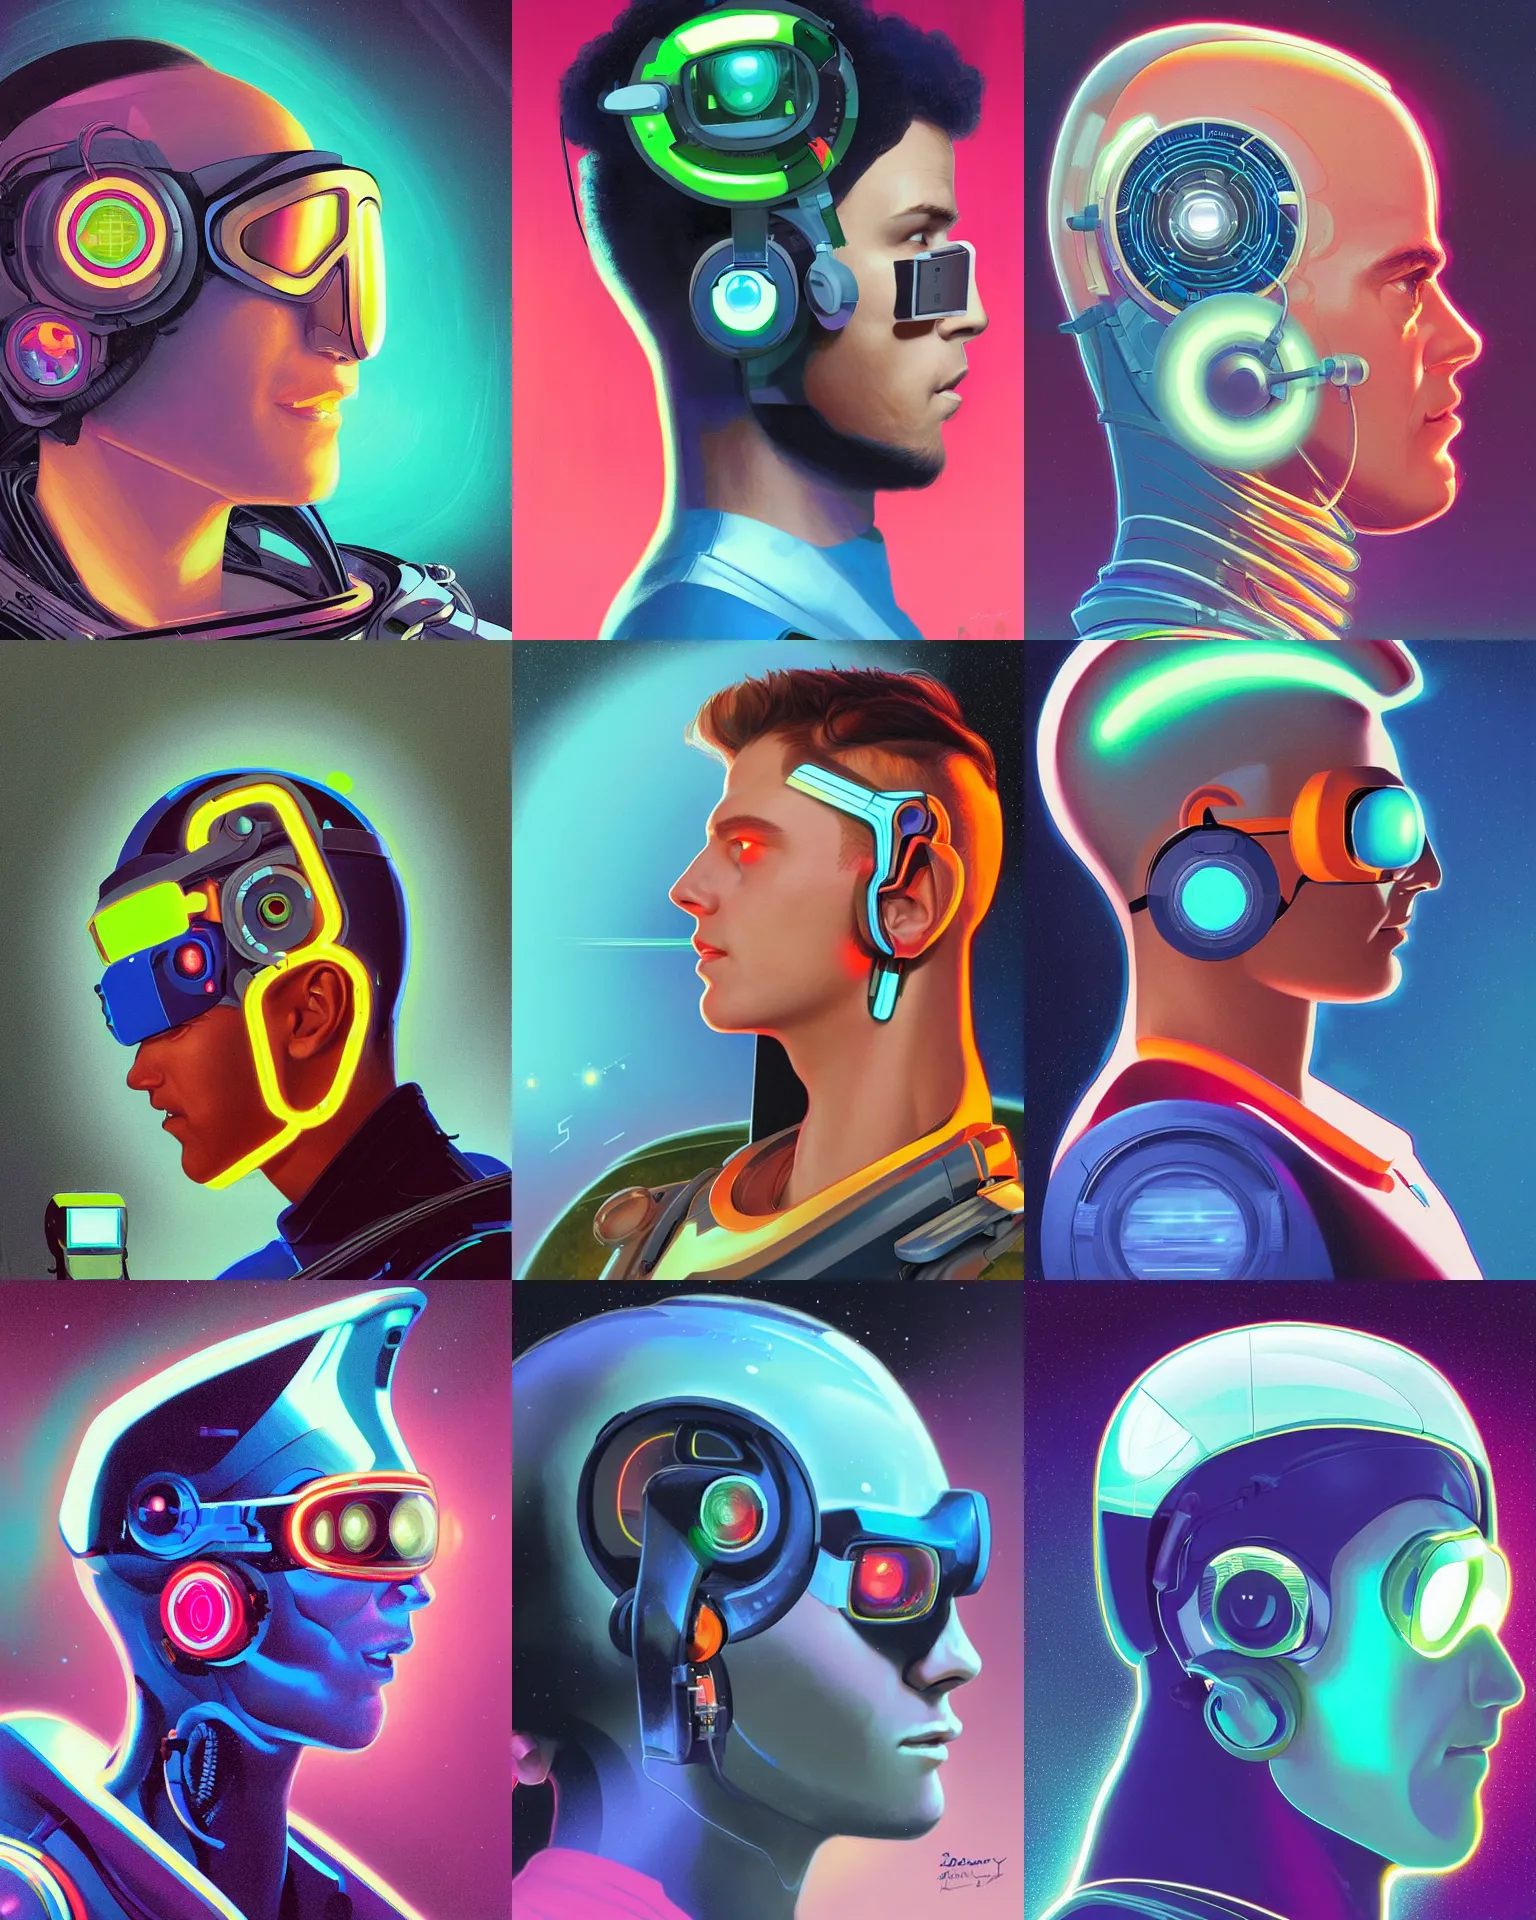 Prompt: side view future coder man, compact cyclops display over eyes and compact bright headphoneset, neon accent lights, holographic colors, desaturated headshot portrait digital painting by dean cornwall, rhads, john berkey, tom whalen, alex grey, alphonse mucha, donoto giancola, astronaut cyberpunk electric widow's peak profile